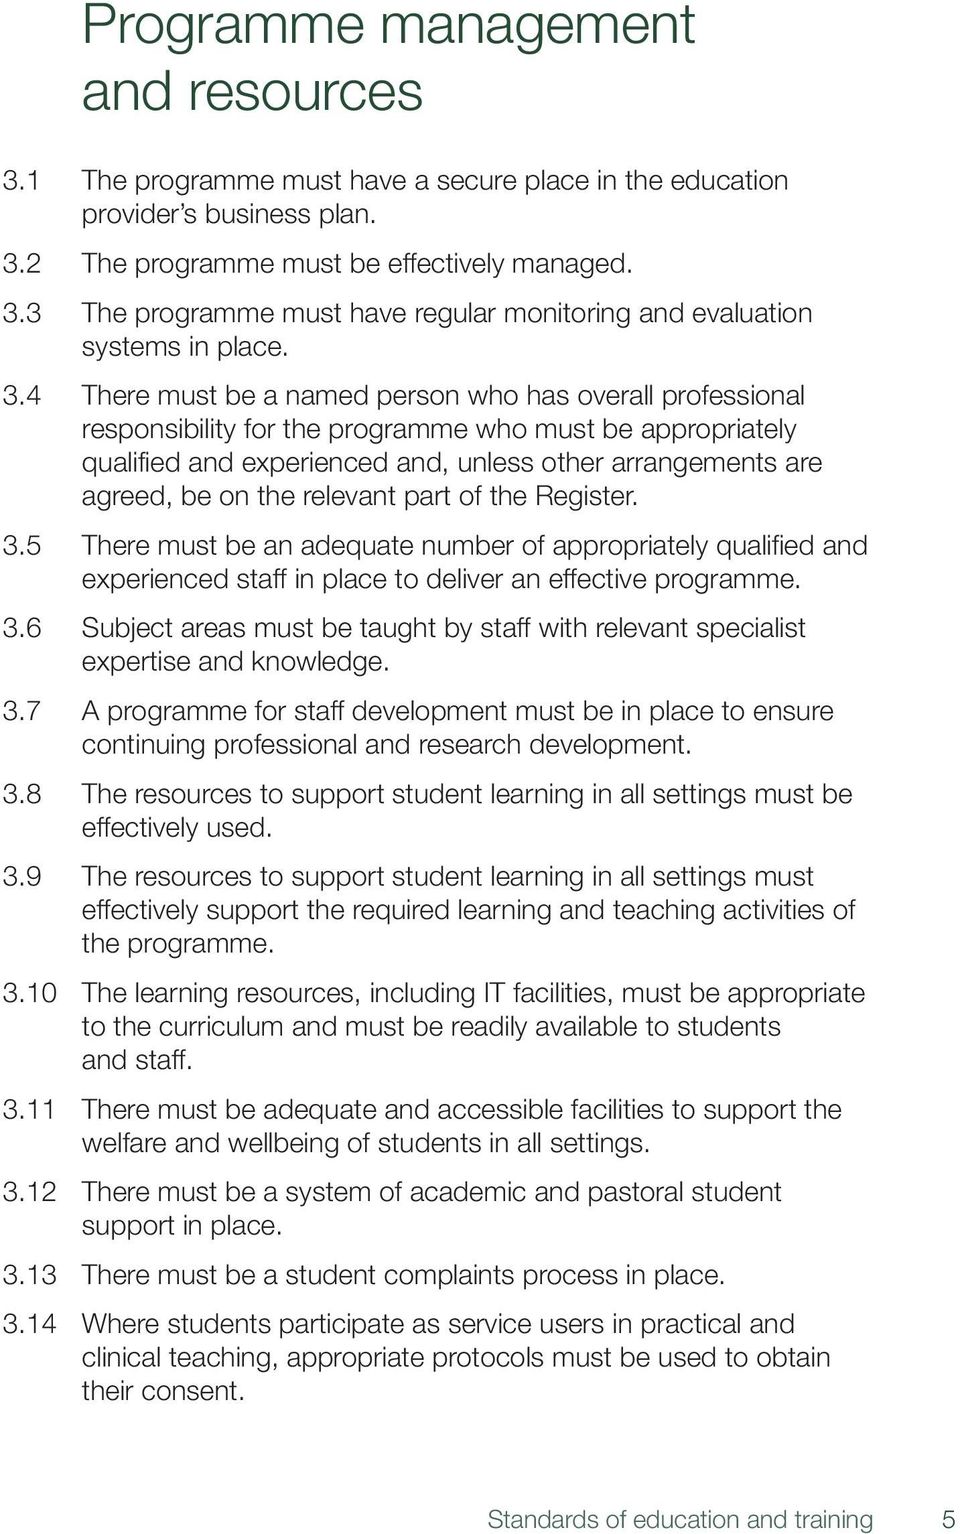 relevant part of the Register. 3.5 There must be an adequate number of appropriately qualified and experienced staff in place to deliver an effective programme. 3.6 Subject areas must be taught by staff with relevant specialist expertise and knowledge.